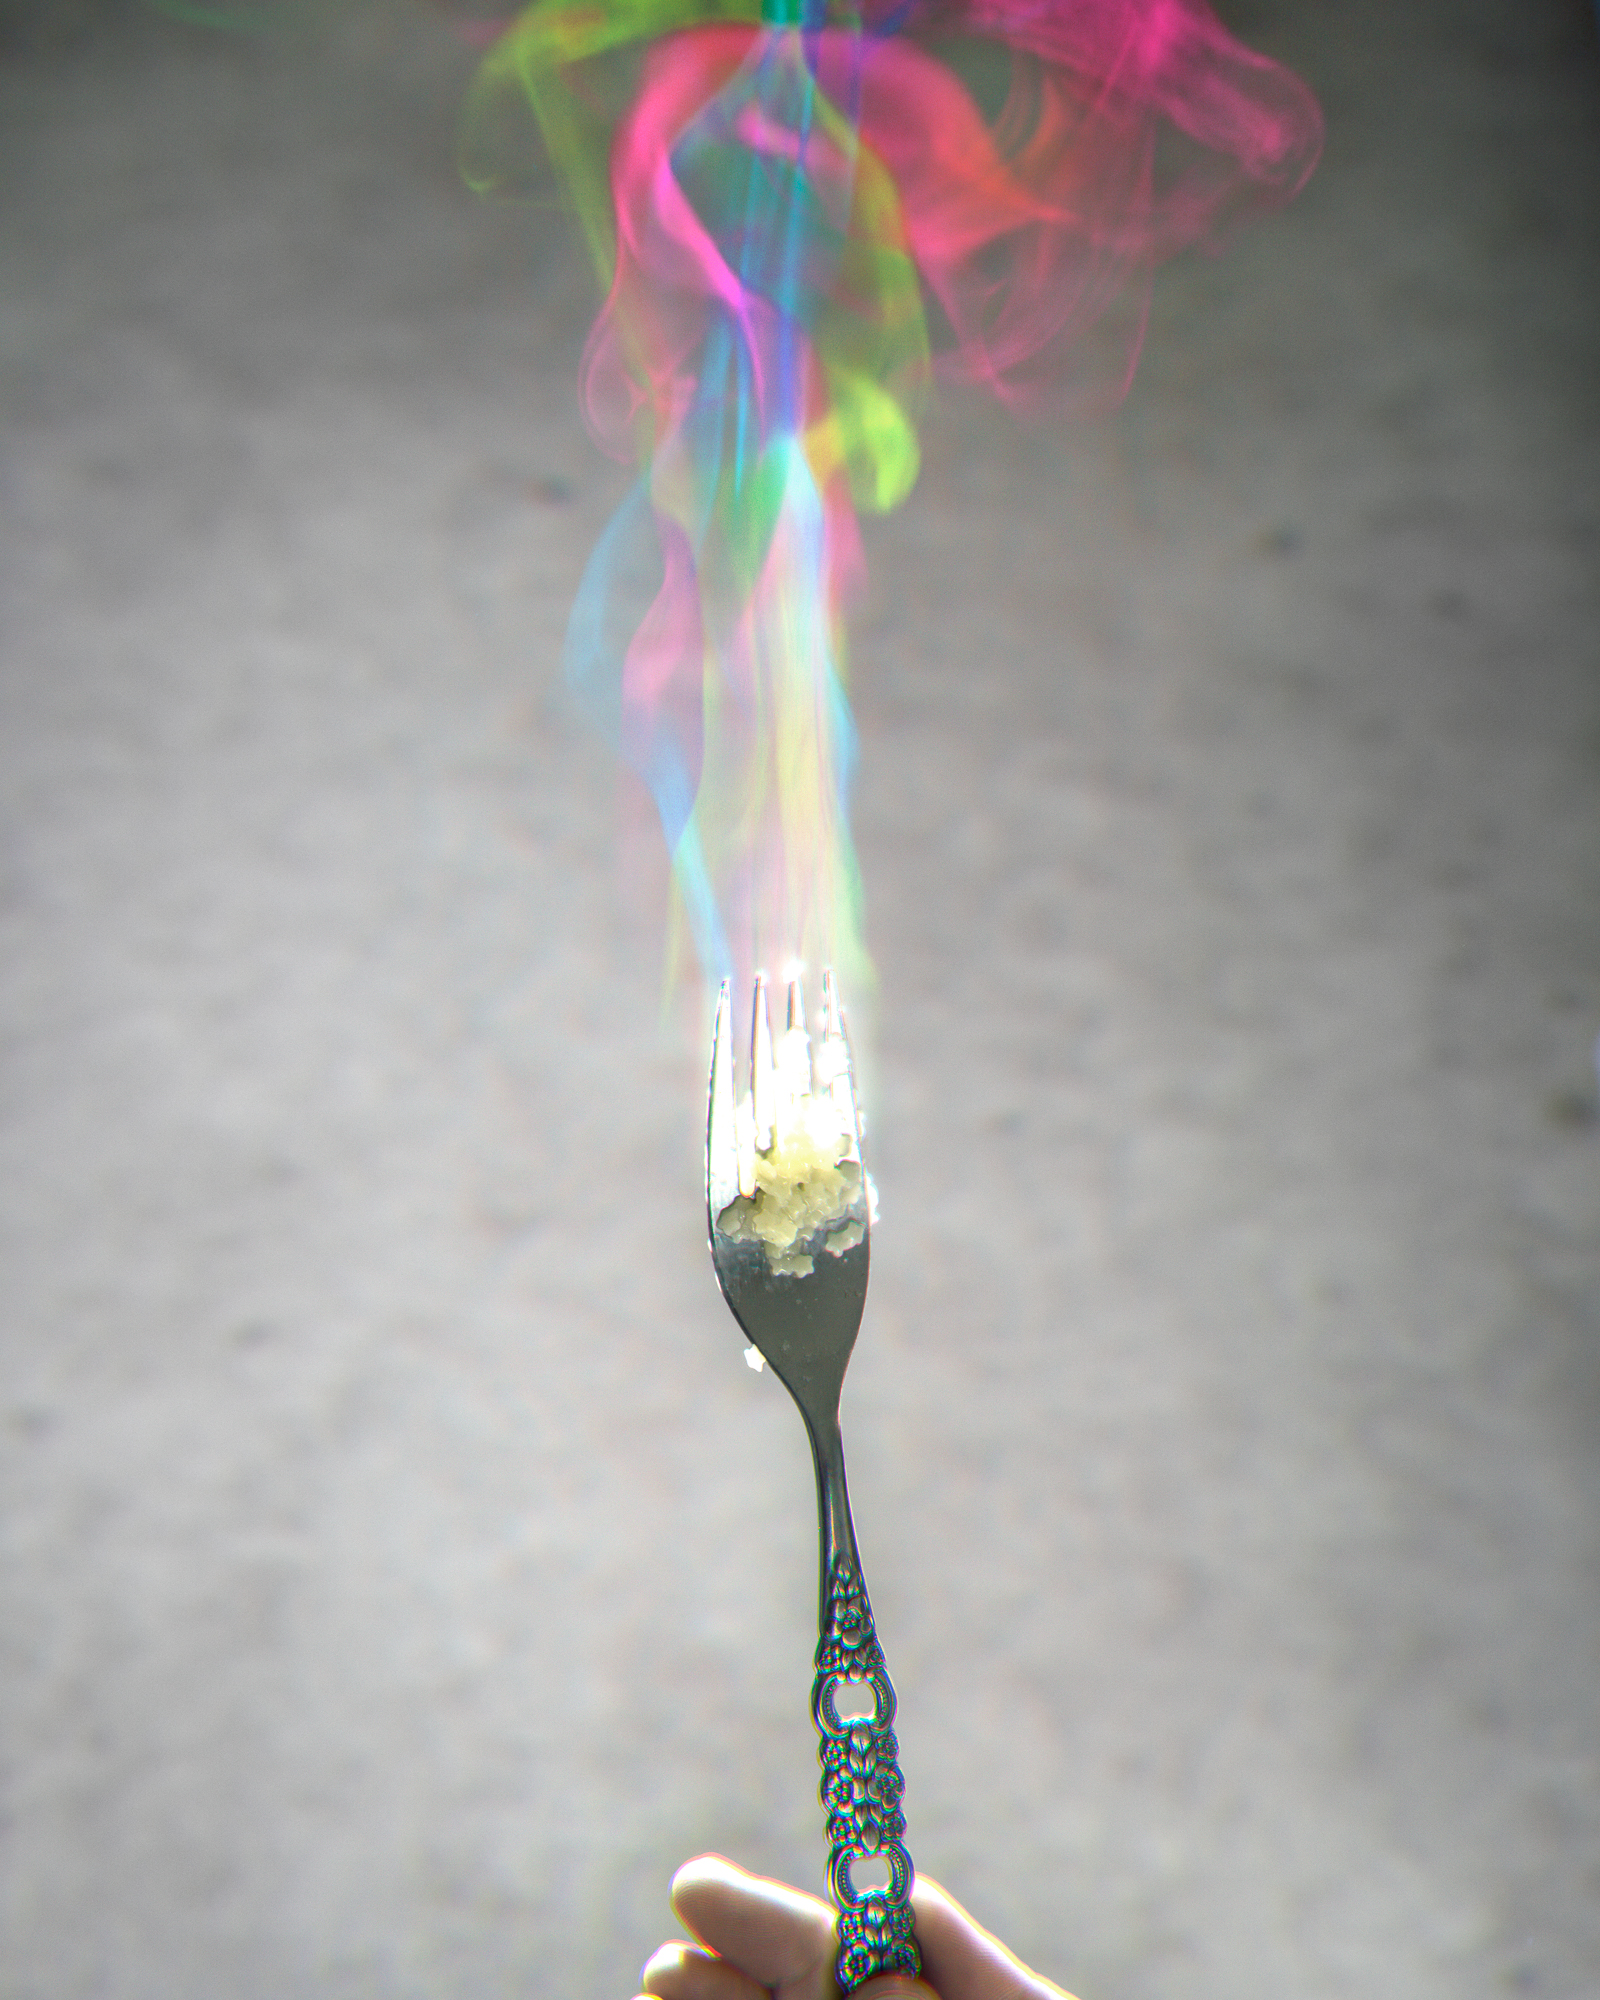   Star Pasta on Steaming Fork , 2015 Archival pigment print 30 x 24 in (76.2 x 60.96 cm)&nbsp;  